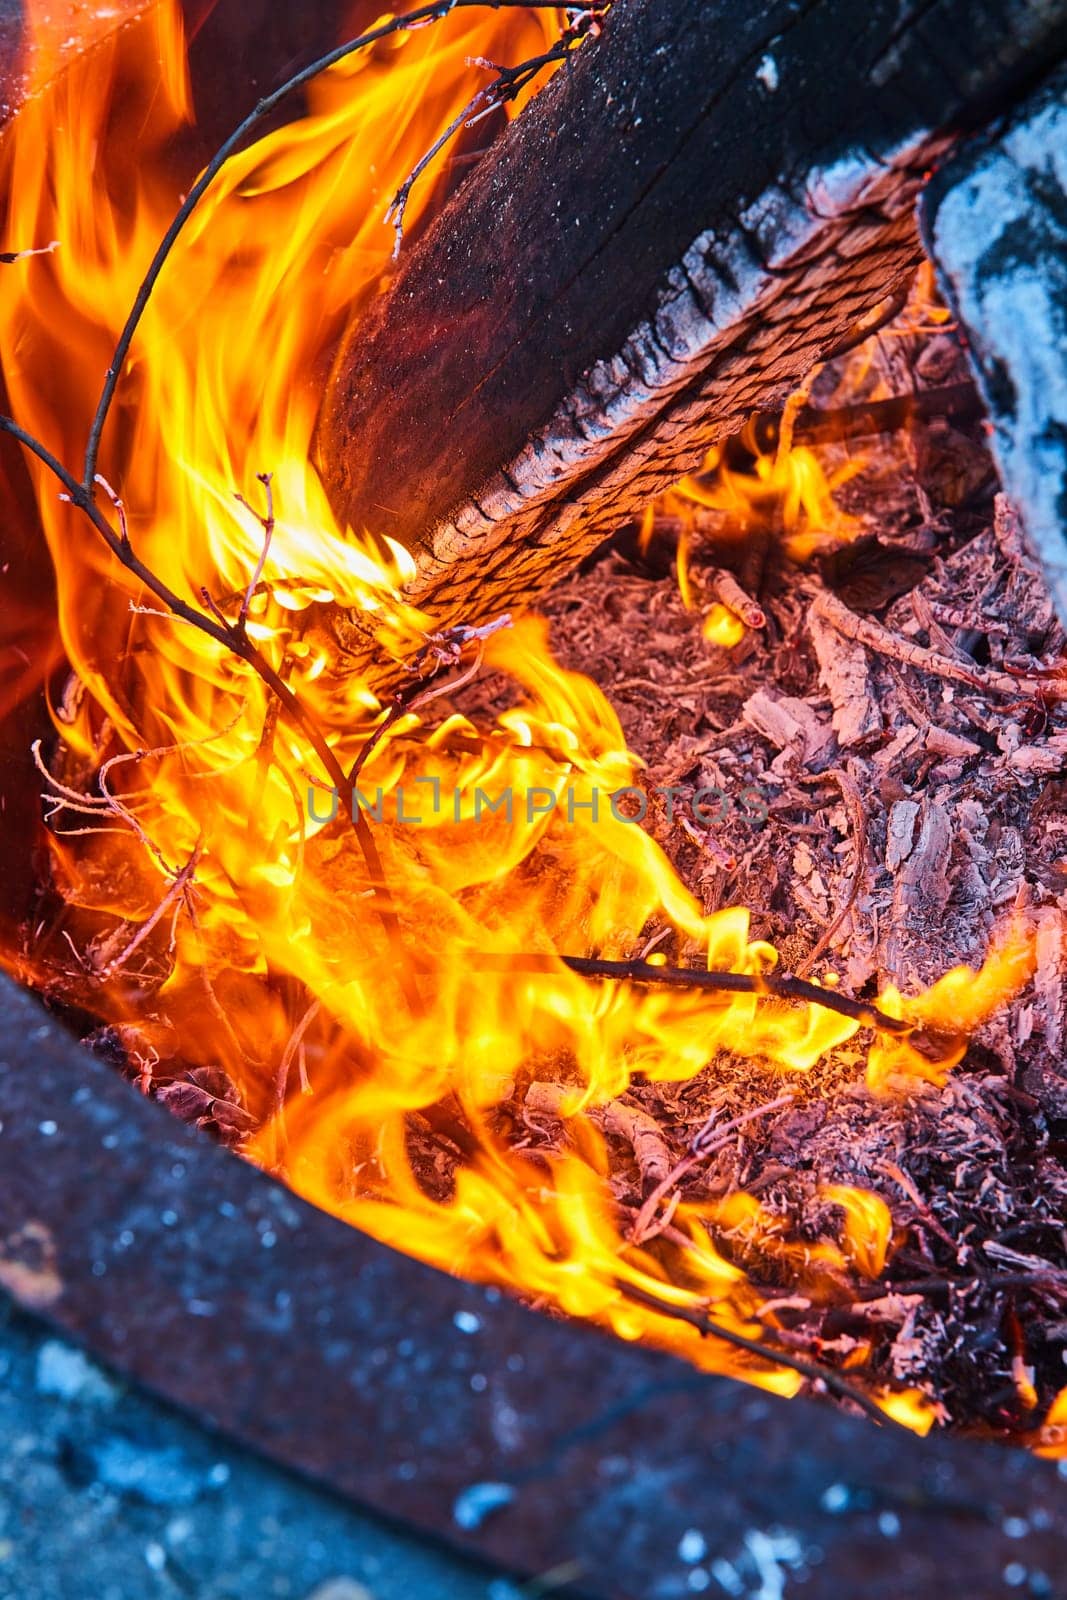 Image of Orange and yellow flames in fire pit with white ashen log and ground